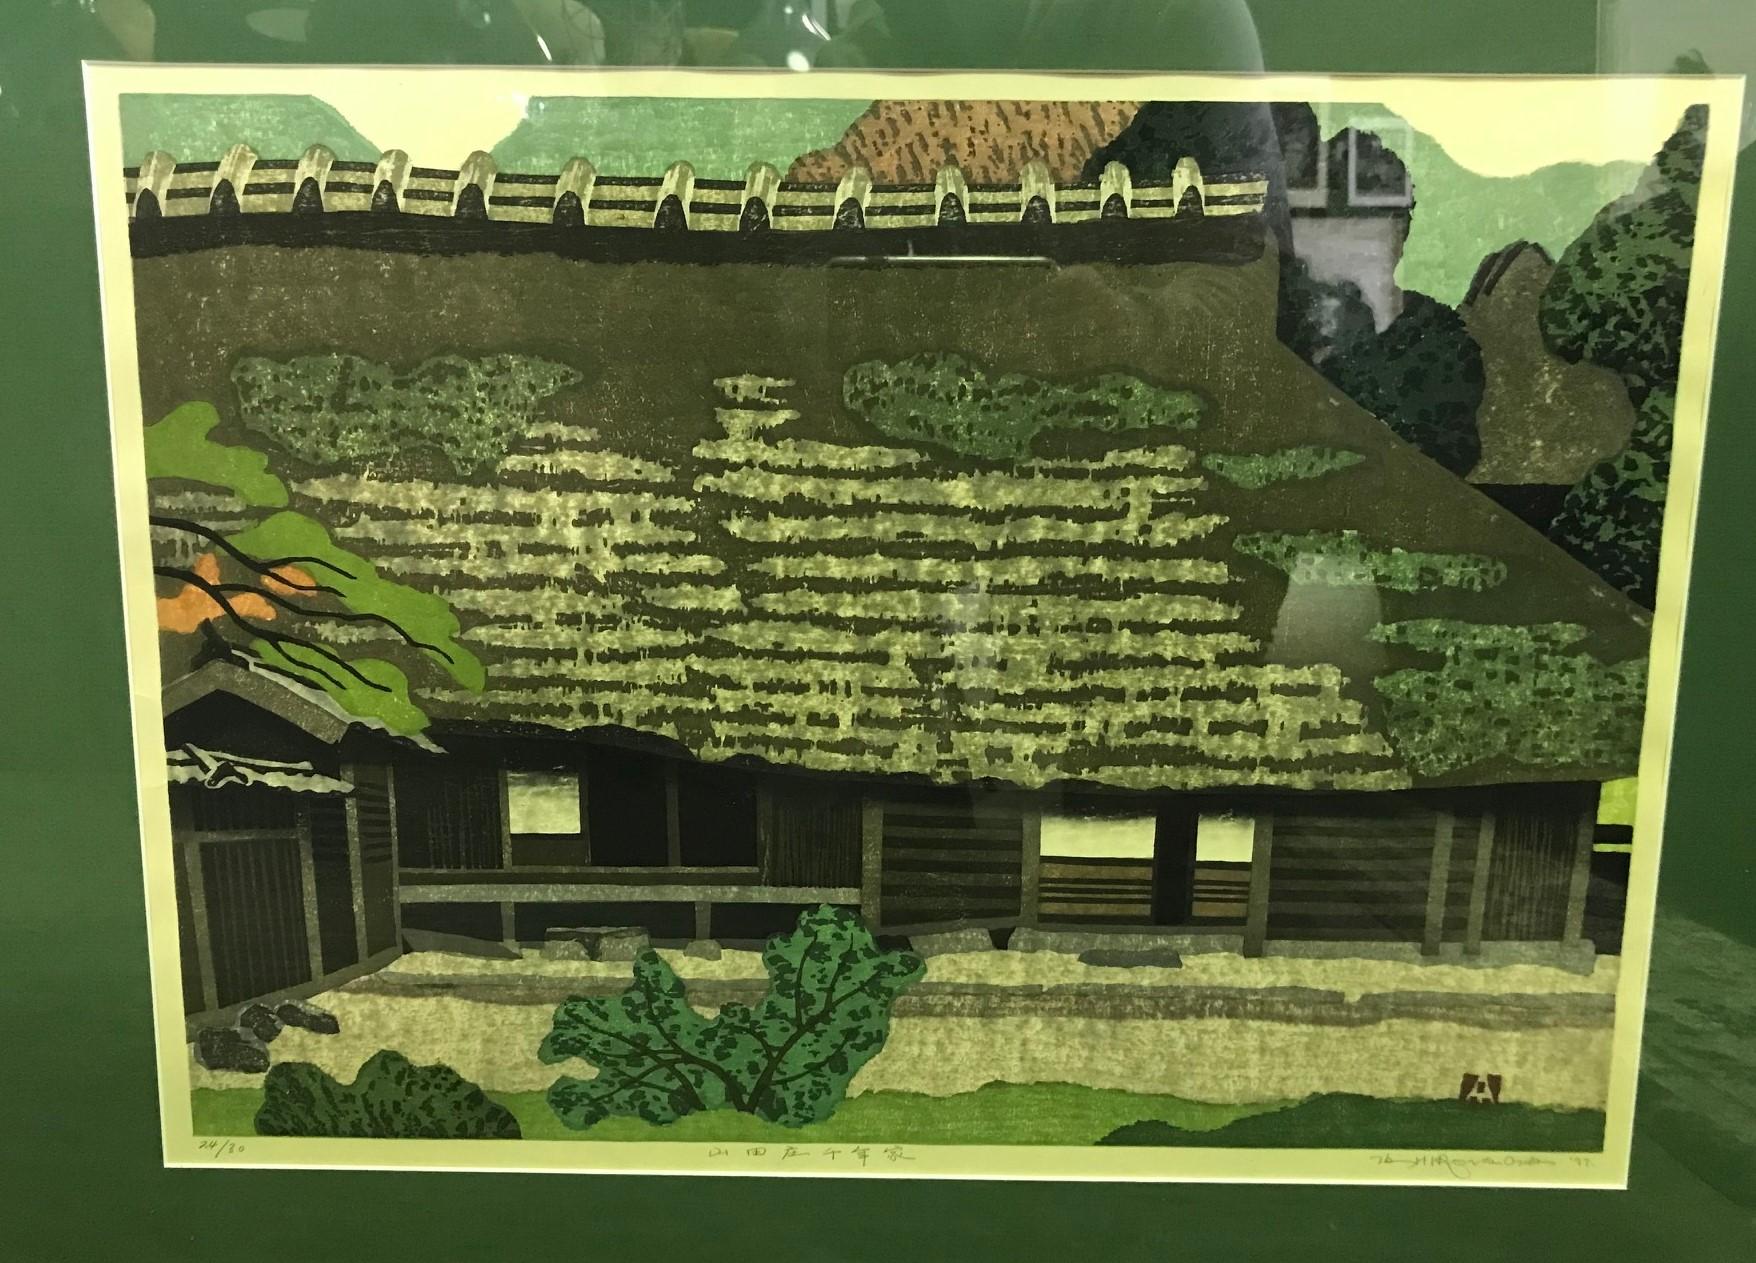 A rare and somewhat hard to find work by Japanese artist Takehiko Hironaga who was good friends with Japanese print master Kiyoshi Saito. Hironaga's primary goal in his work was to preserve graphically the historical houses of Japan. For several